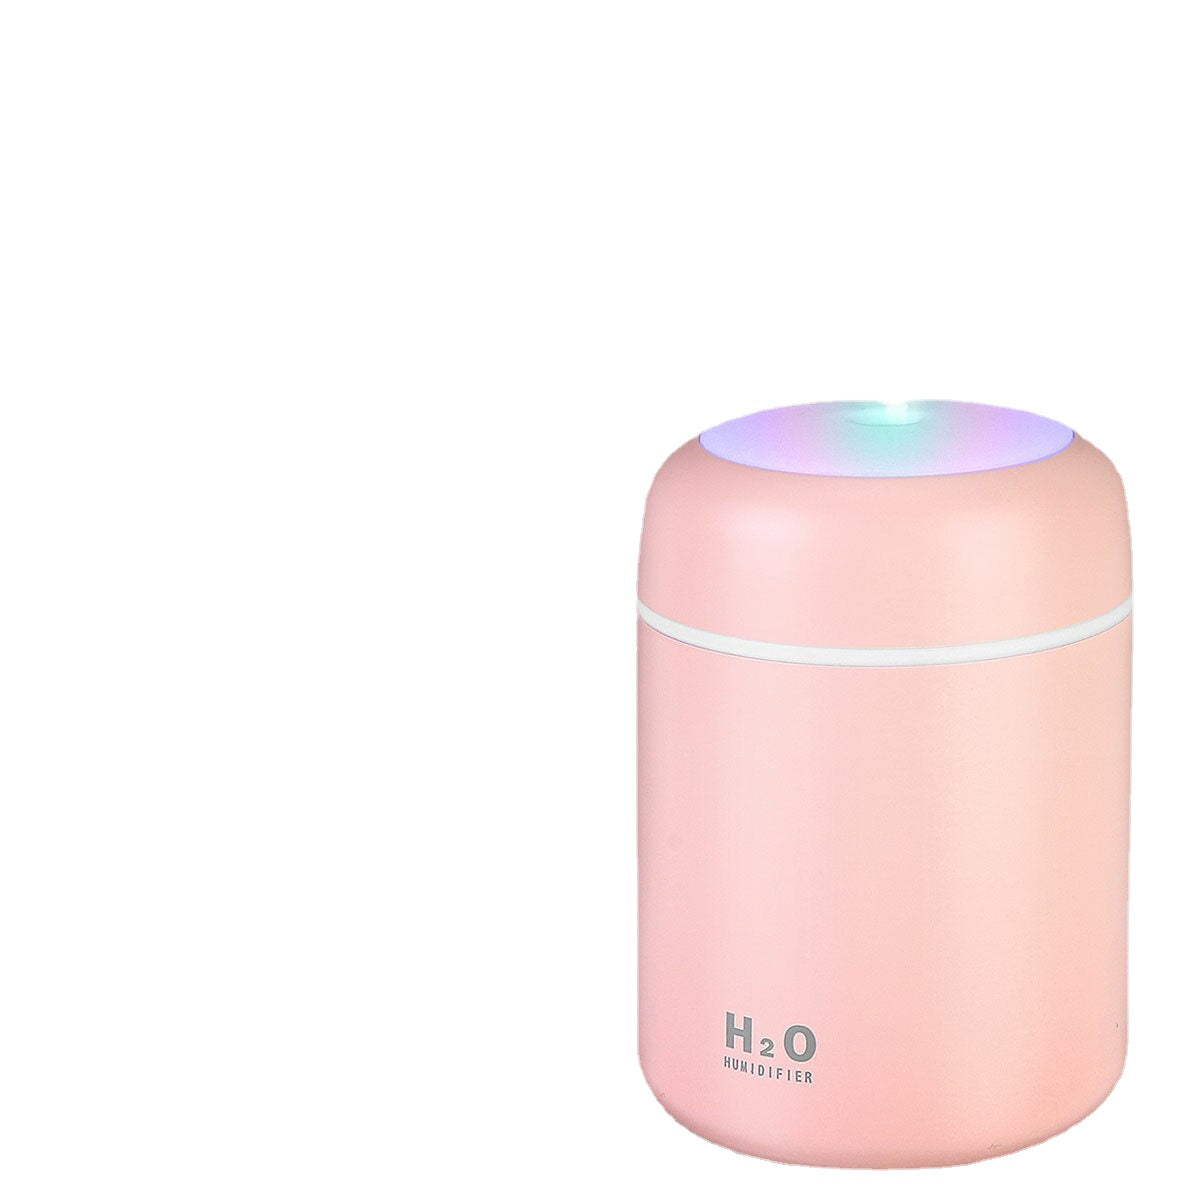 300ml Ultrasonic Electric Air Aroma Diffuser Humidifier 2 Modes LED Night Light for Home Office